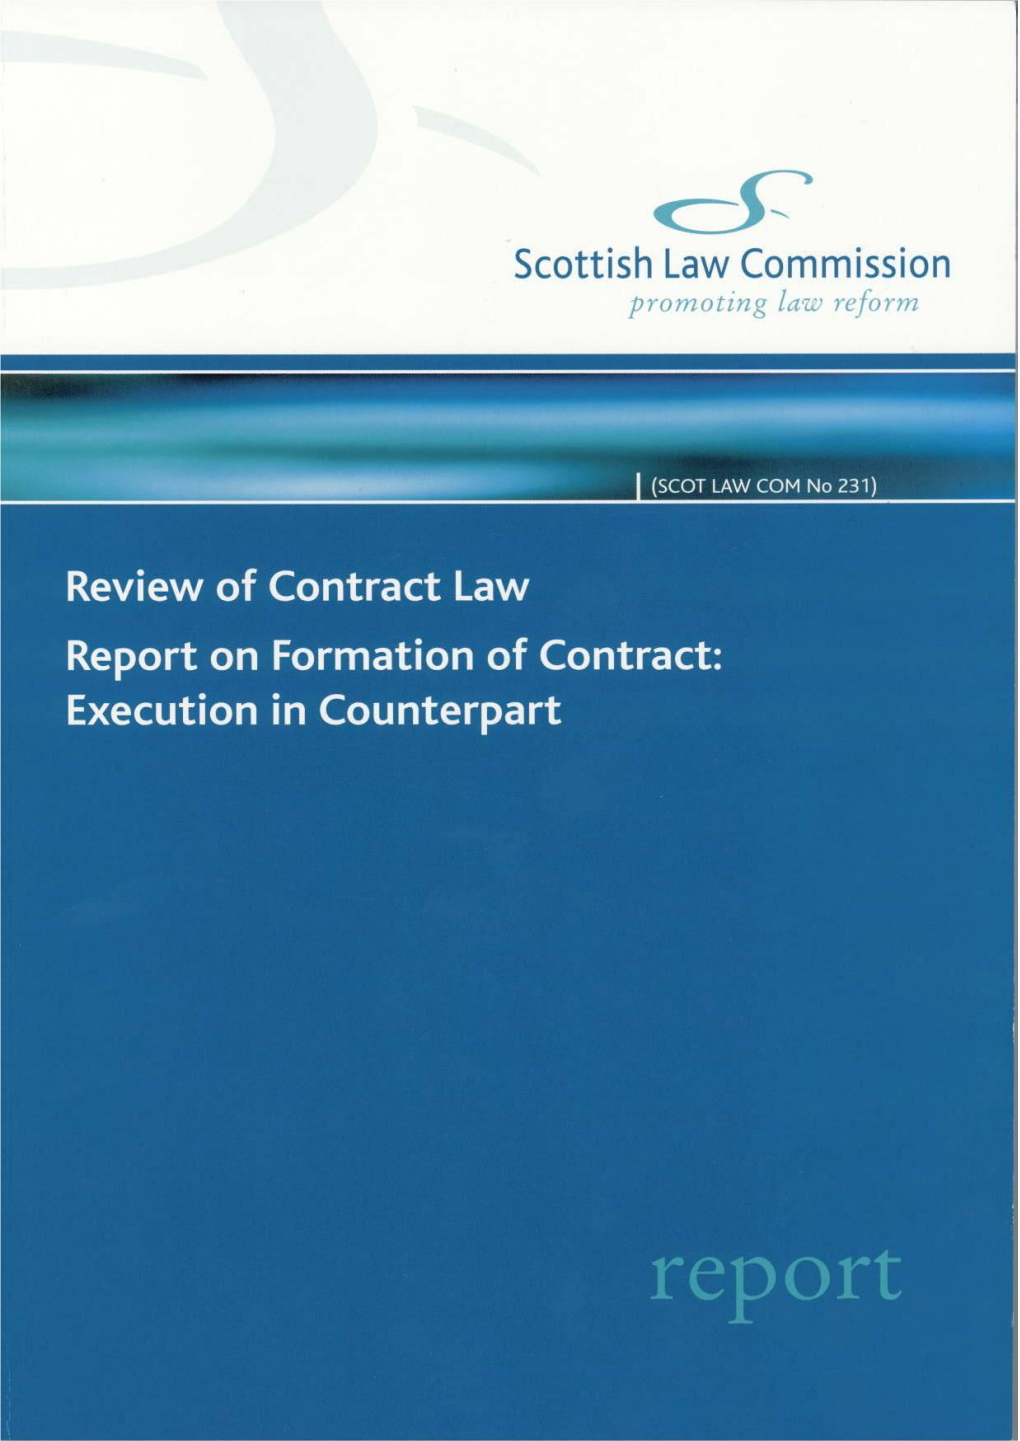 Report on Formation of Contract: Execution in Counterpart